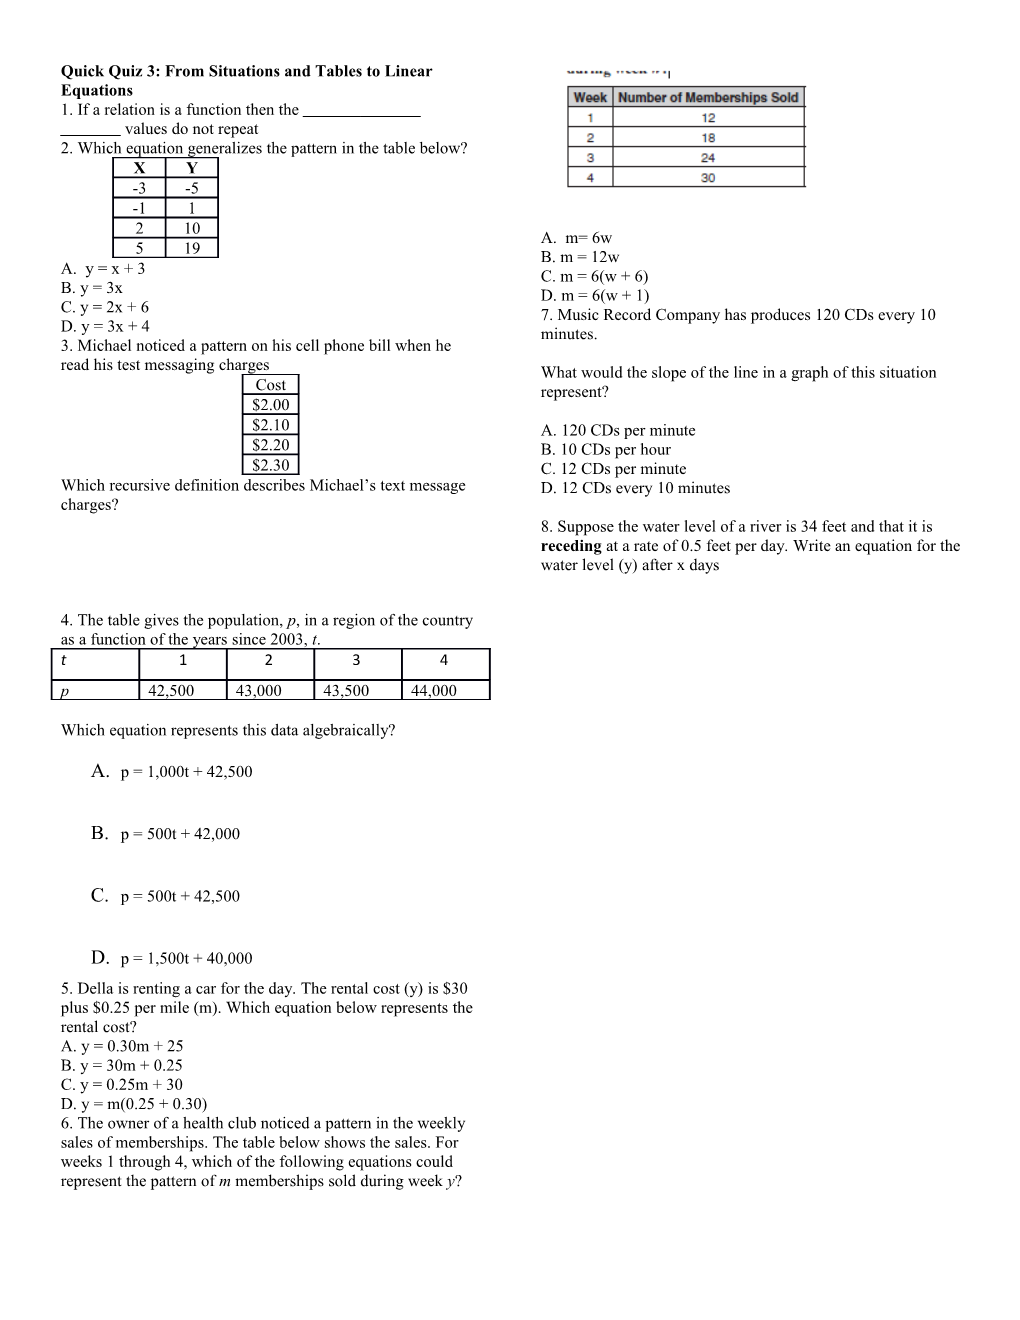 Quick Quiz 3: from Situations and Tables to Linear Equations